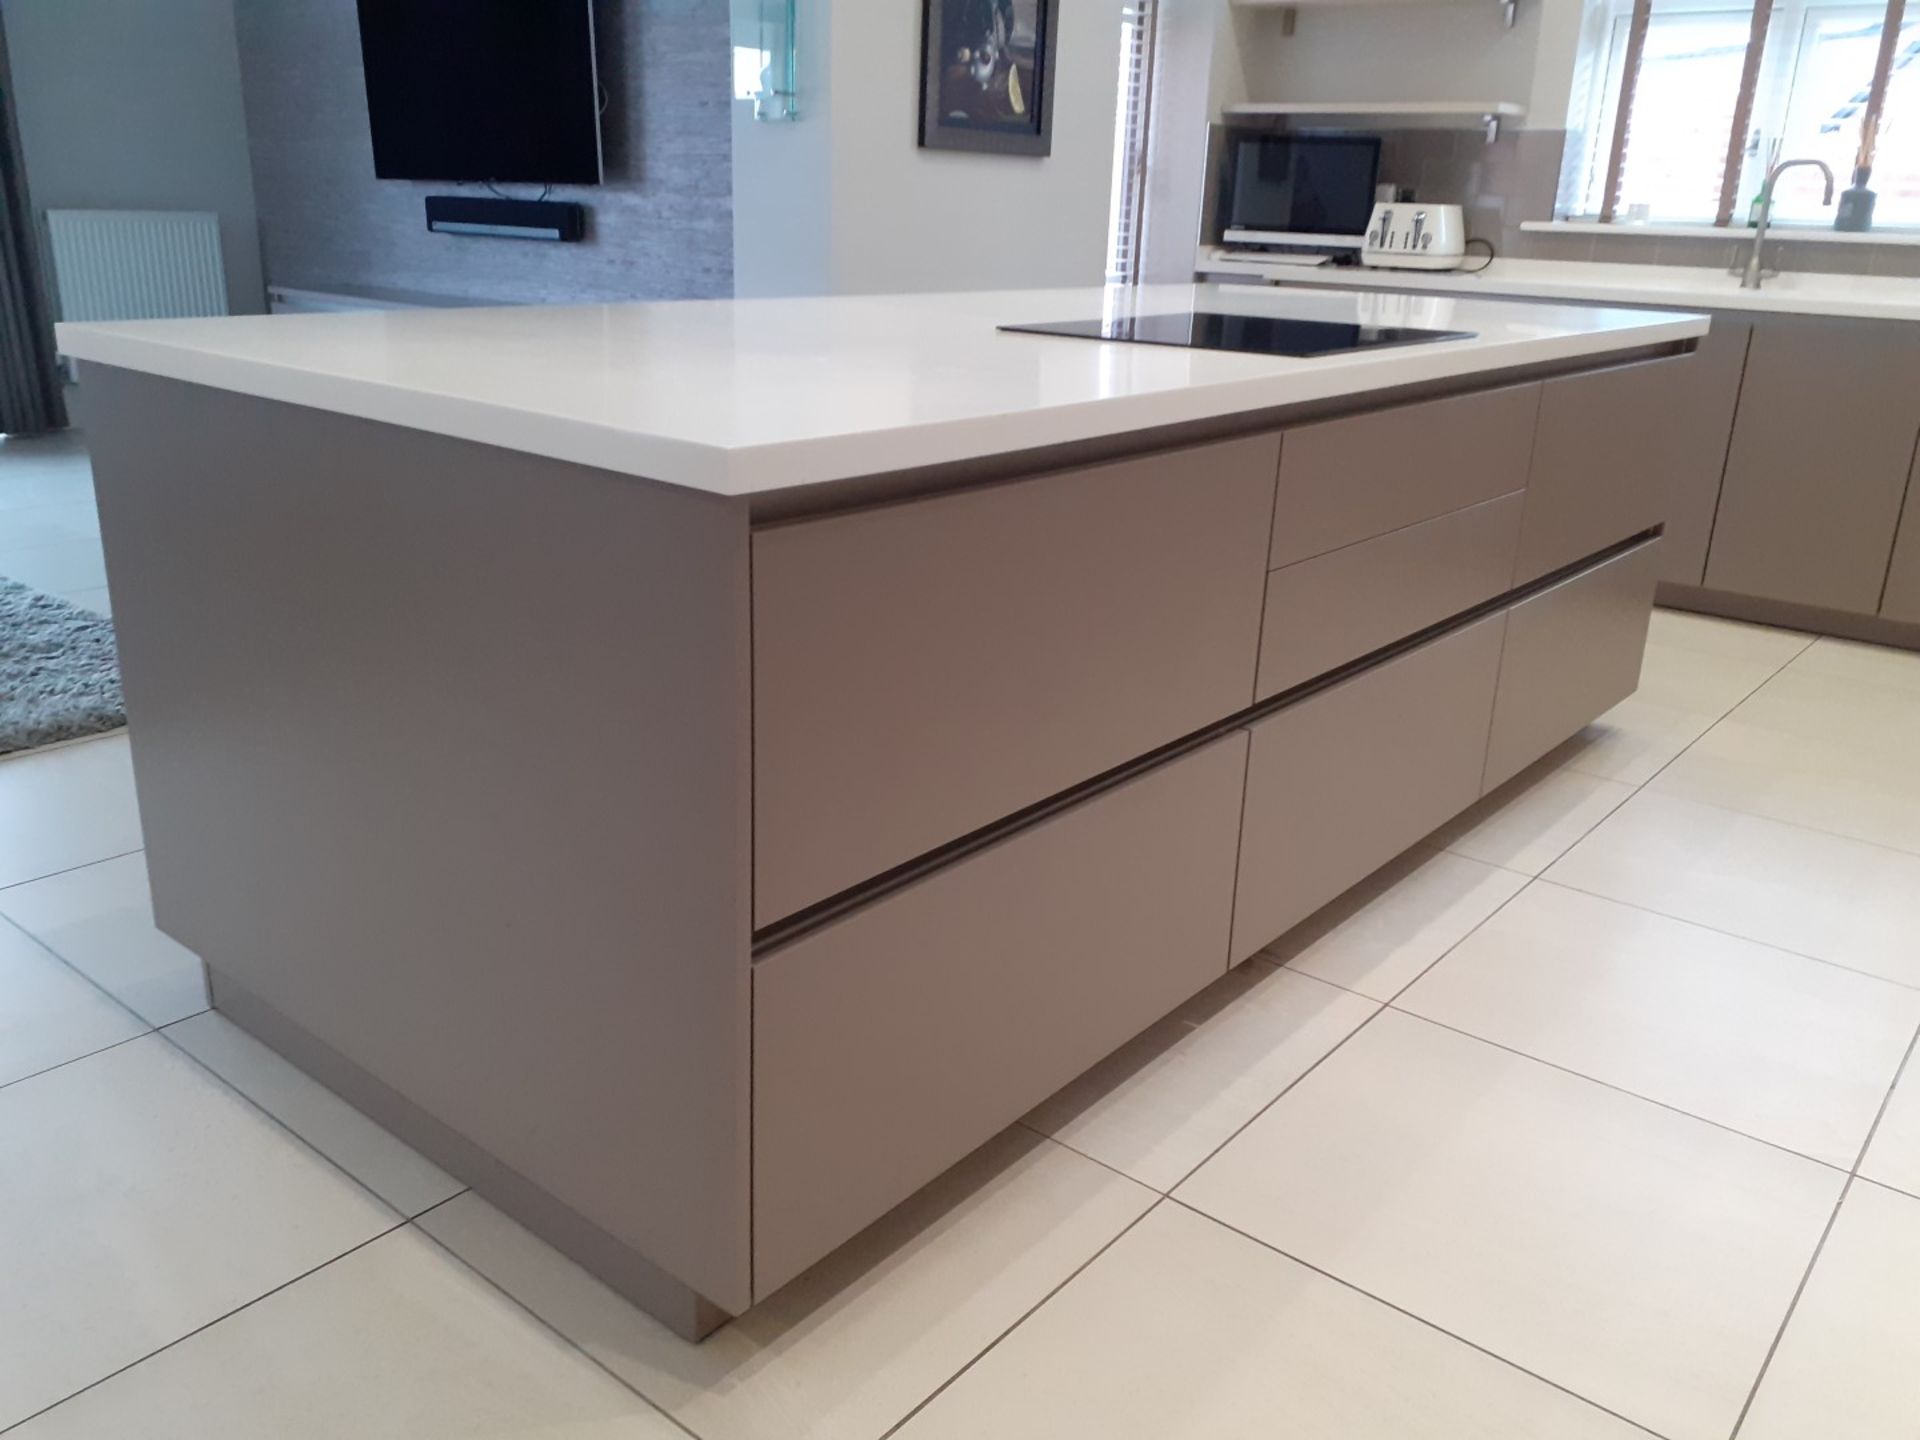 1 x SieMatic Handleless Fitted Kitchen With Intergrated NEFF Appliances, Corian Worktops And Island - Image 7 of 92